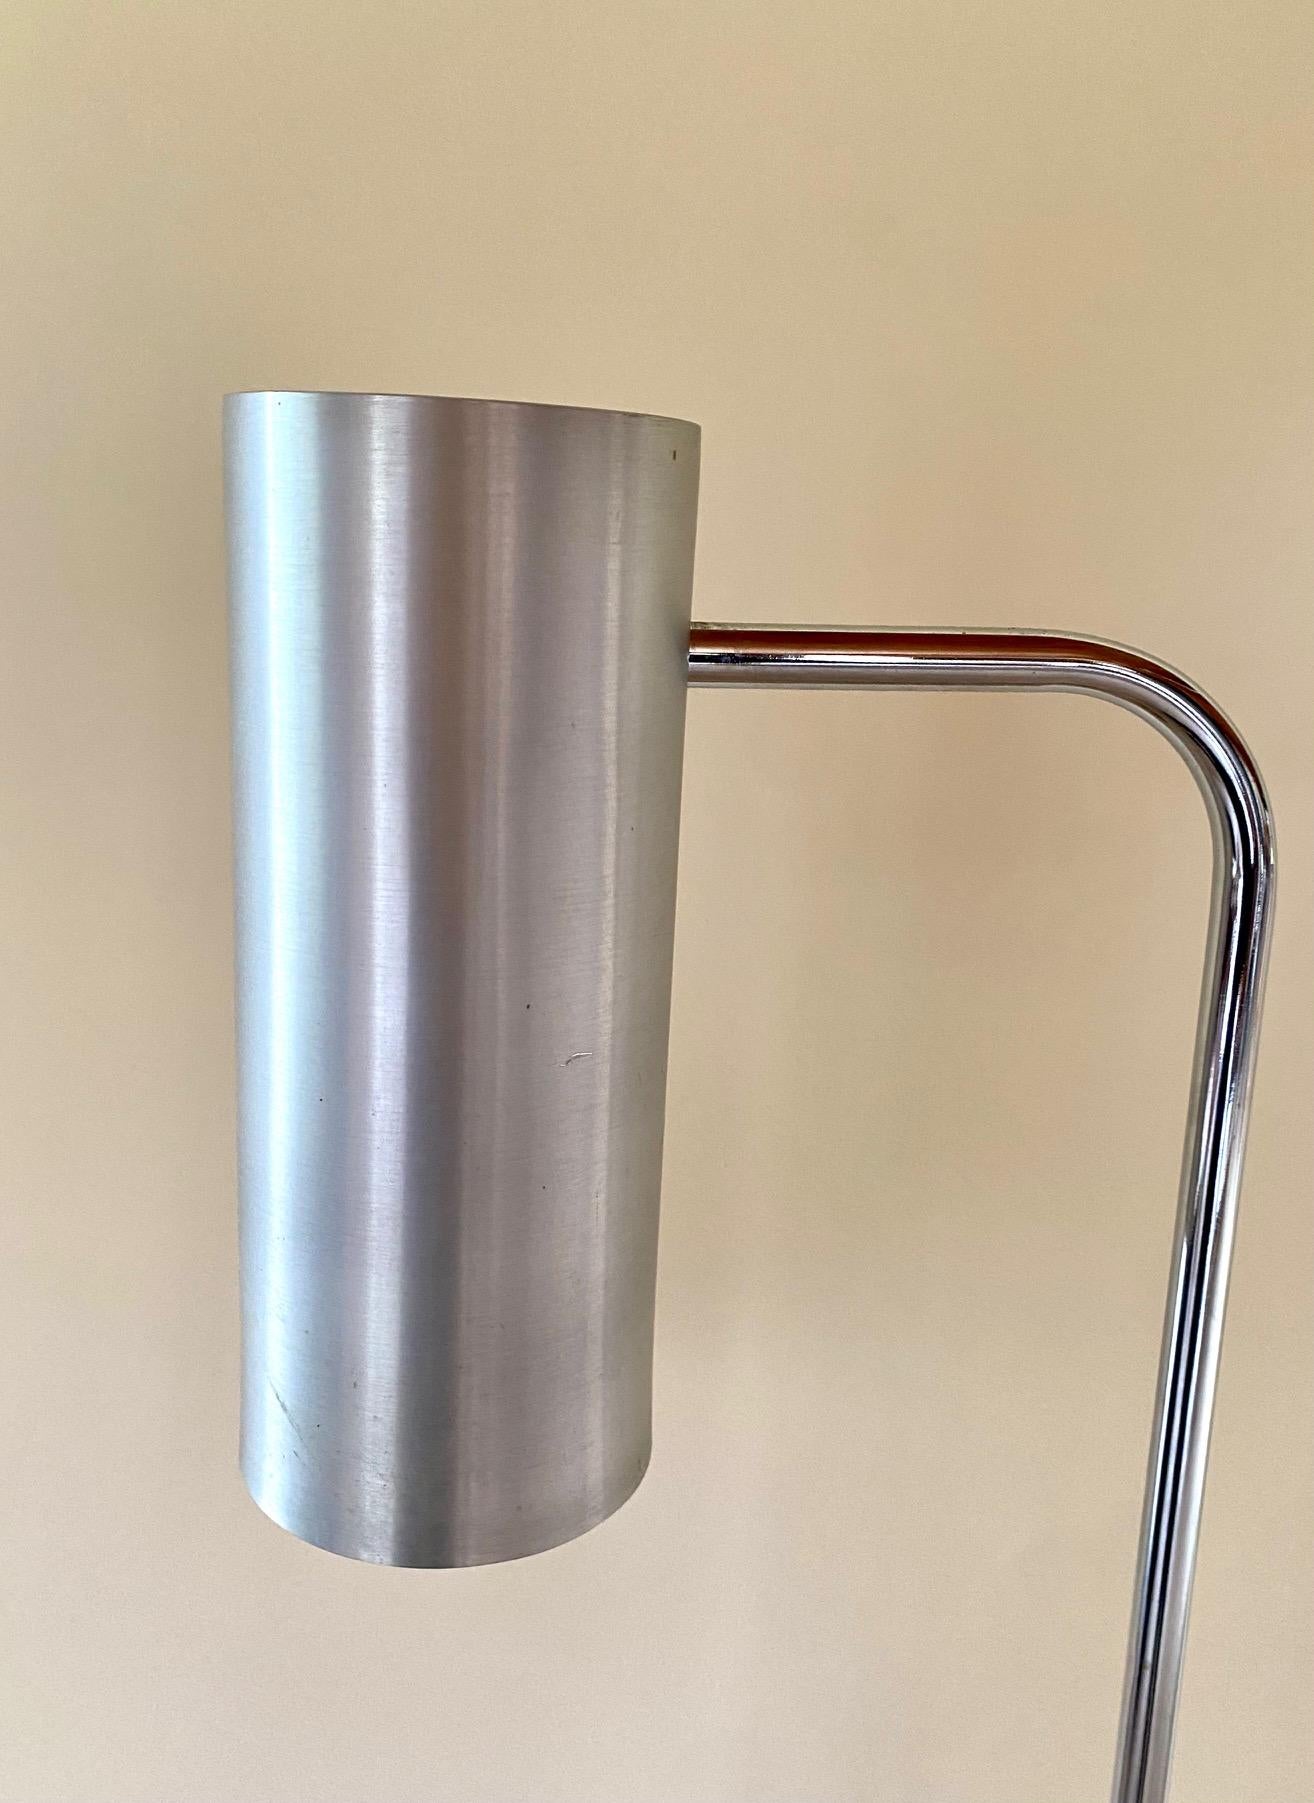 Metal Reader Floor Lamp by Rico and Rosemarie Baltensweiler, 1970s For Sale 1